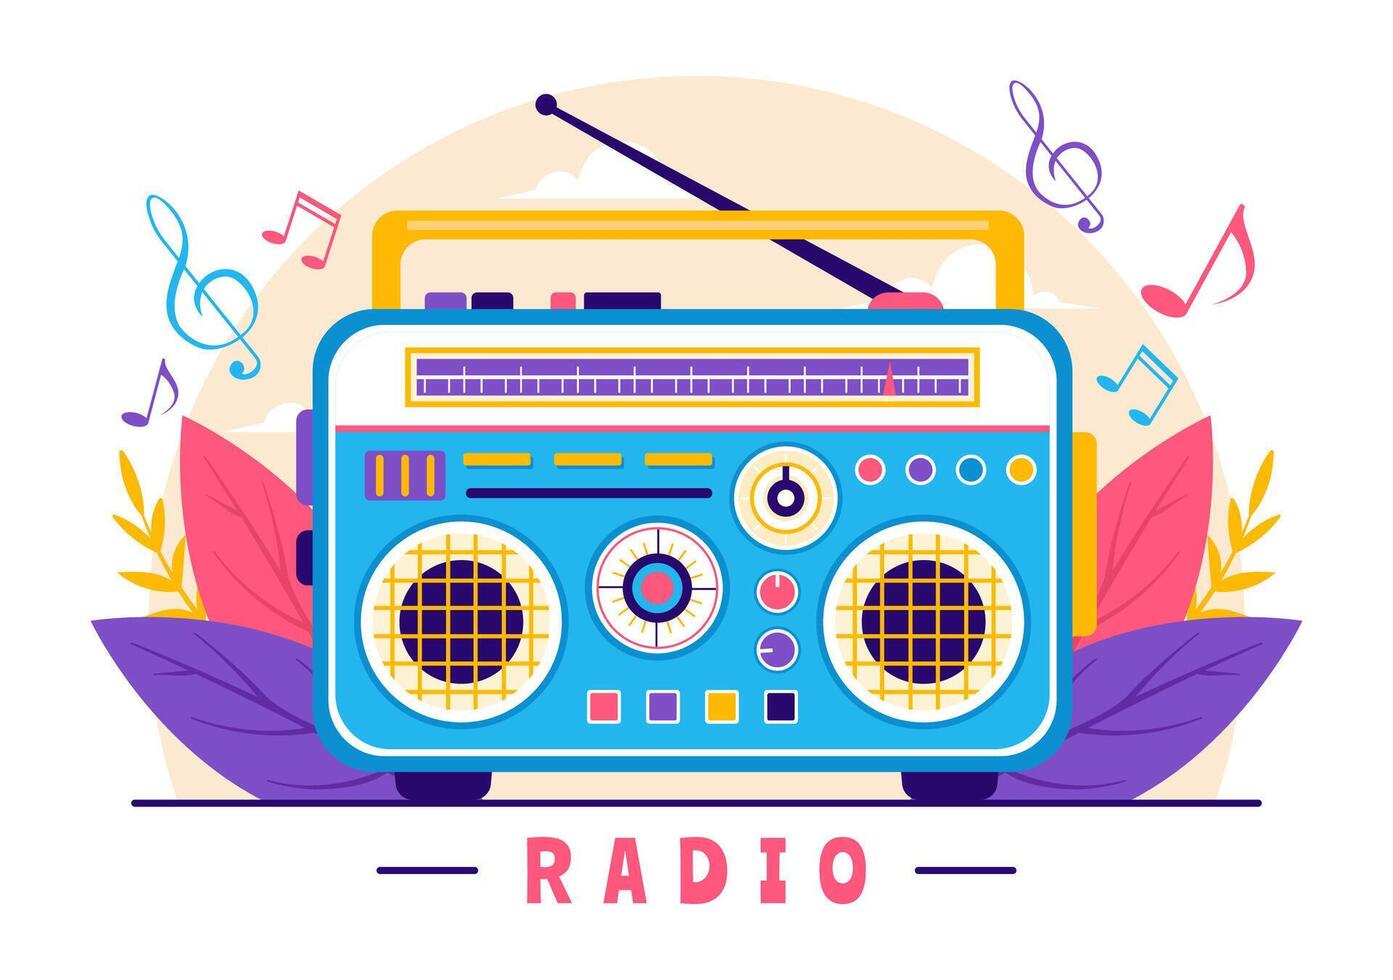 Radio Vector Illustration with a Musical Instrument used to Send Signals for Record, Old Receiver and Listening to Music in Flat Cartoon Background